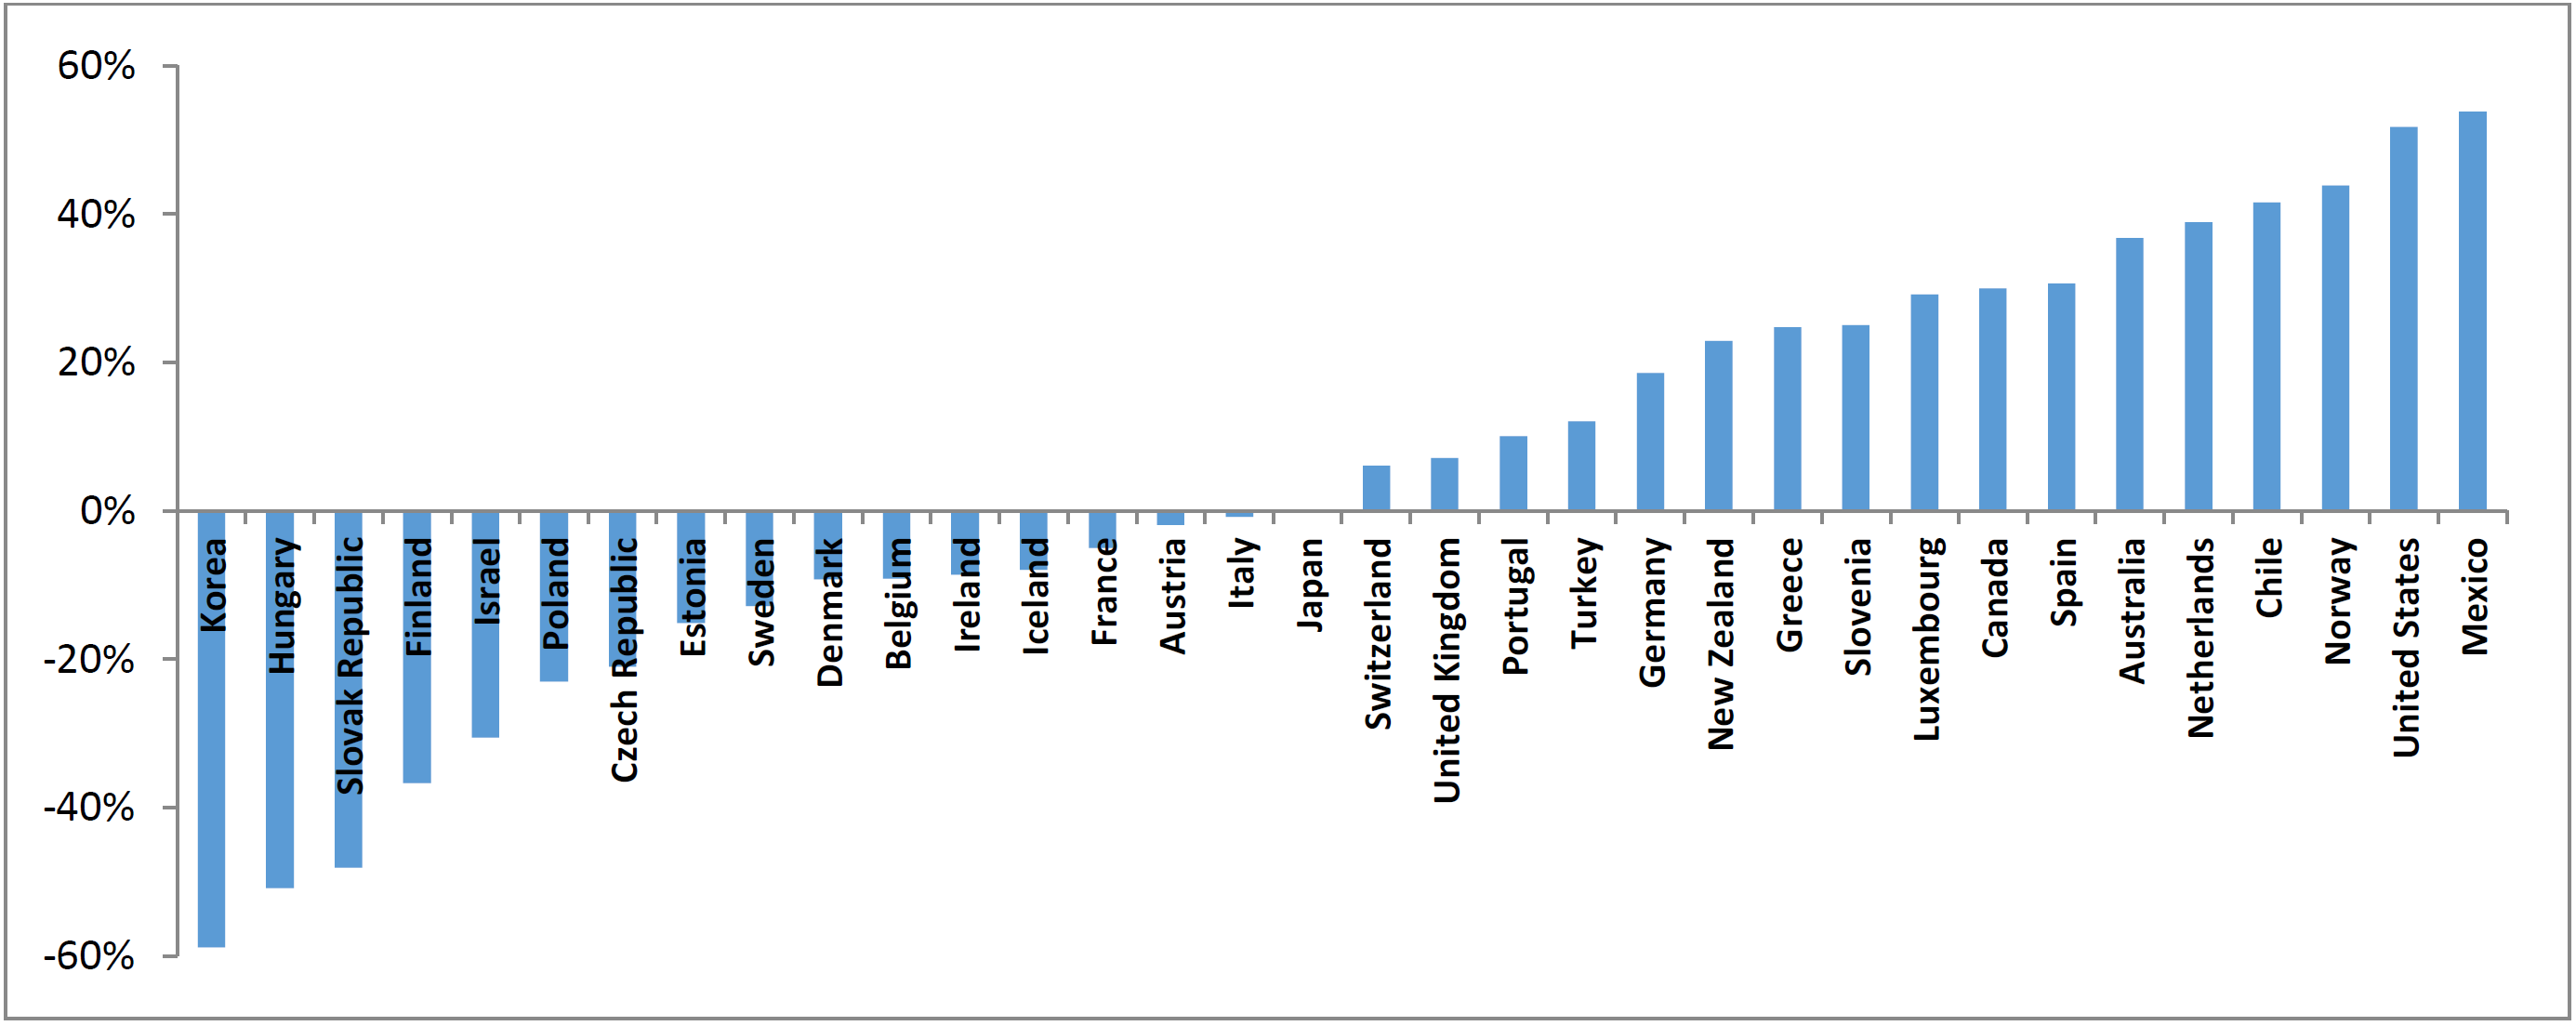 Figure 4 Comparison of prices for landline broadband in OECD countries (% of undervaluation or overvaluation corresponding to the relative Big Mac Index)